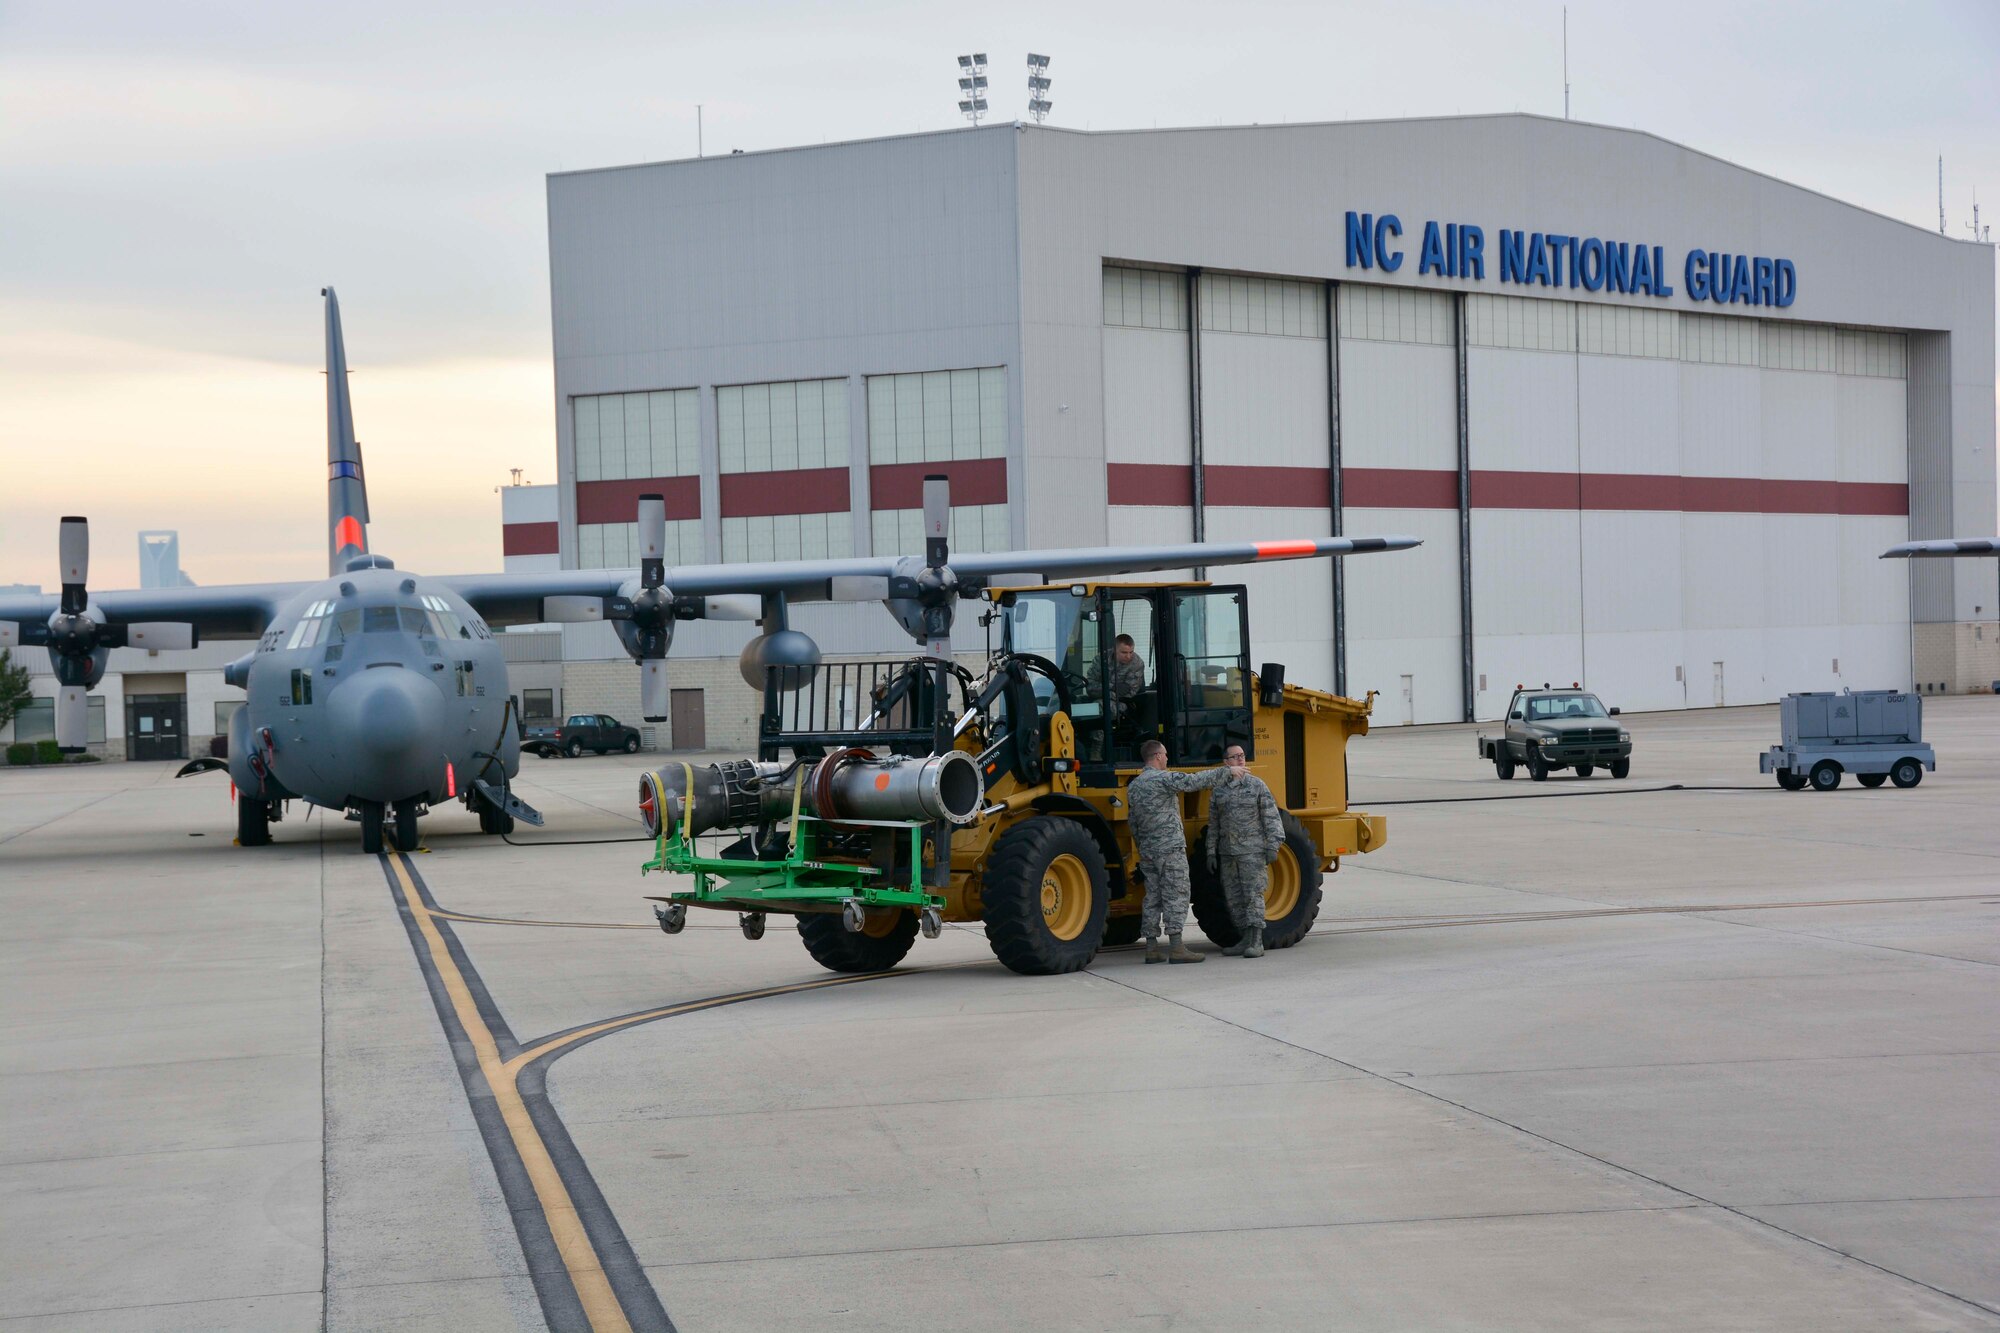 North Carolina Air National Guard aerial porters, use an all-terrain forklift to carry a nozzle of a Modular Airborne Firefighting System II (MAFFS II) to waiting 145th Airlift Wing, C-130 Hercules aircraft at the North Carolina Air National Guard Base, Charlotte Douglas International Airport; April 29, 2015, in preparation for the 2015 MAFFS annual training being held in Greenville, S.C. MAFFS II discharges the fire retardant through the special nozzle installed and sealed in the modified paratrooper door on the left side of the aircraft. This allows the aircraft to remain pressurized during drop sequences. (U.S. Air National Guard photo by Master Sgt. Patricia F. Moran, 145th Public Affairs/Released)